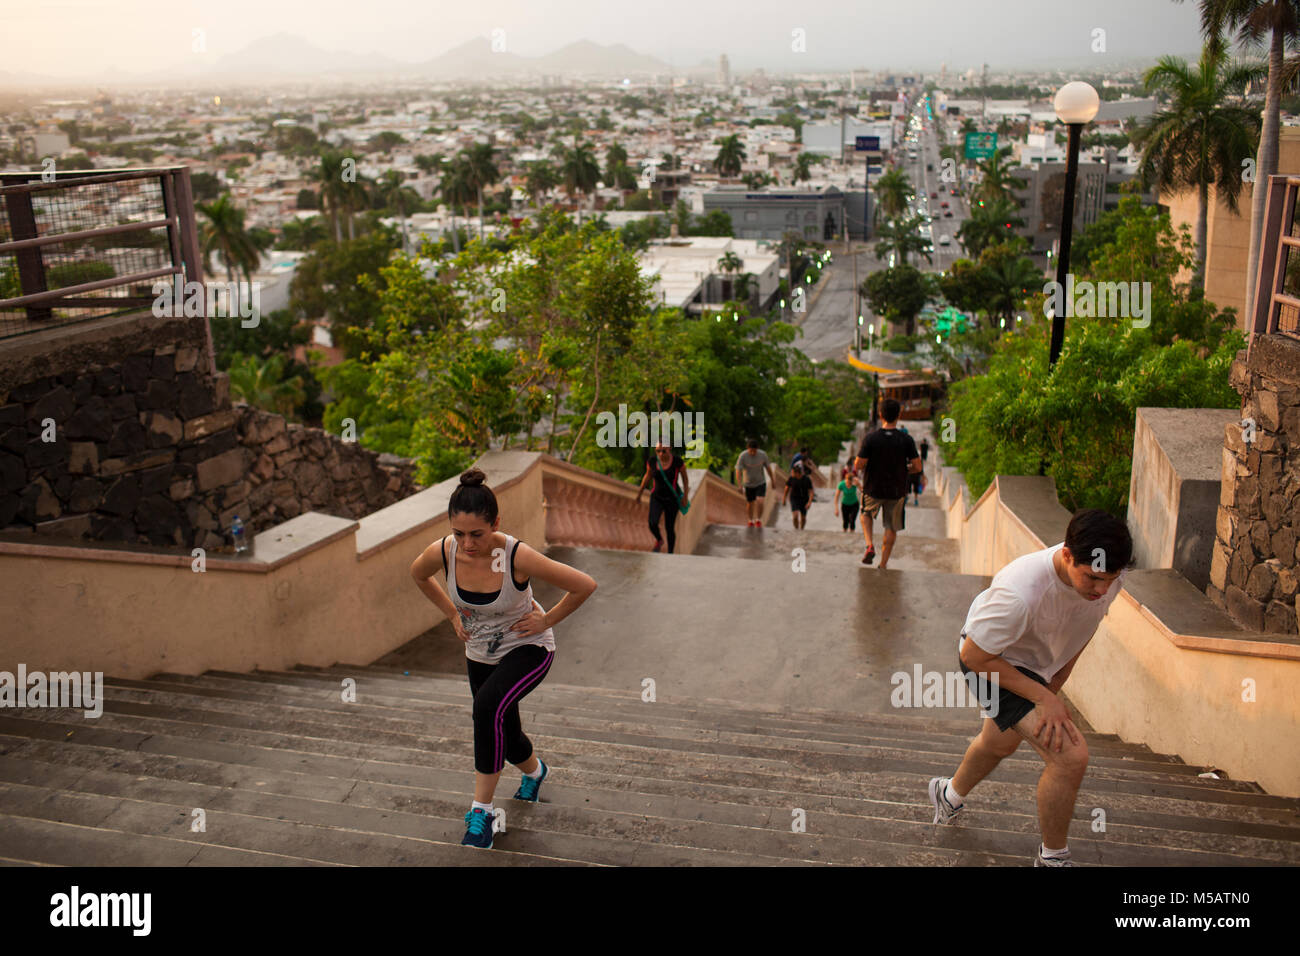 People exercise in Culiac‡n, Sinaloa, Mexico on Thursday, July 16, 2015. Sinaloa is the Mexican state where the notorious drug cartel leader Joaqu’n 'El Chapo' Guzm‡n is from. Guzm‡n recently escaped from a maximum security Mexican prison for the second time. Stock Photo